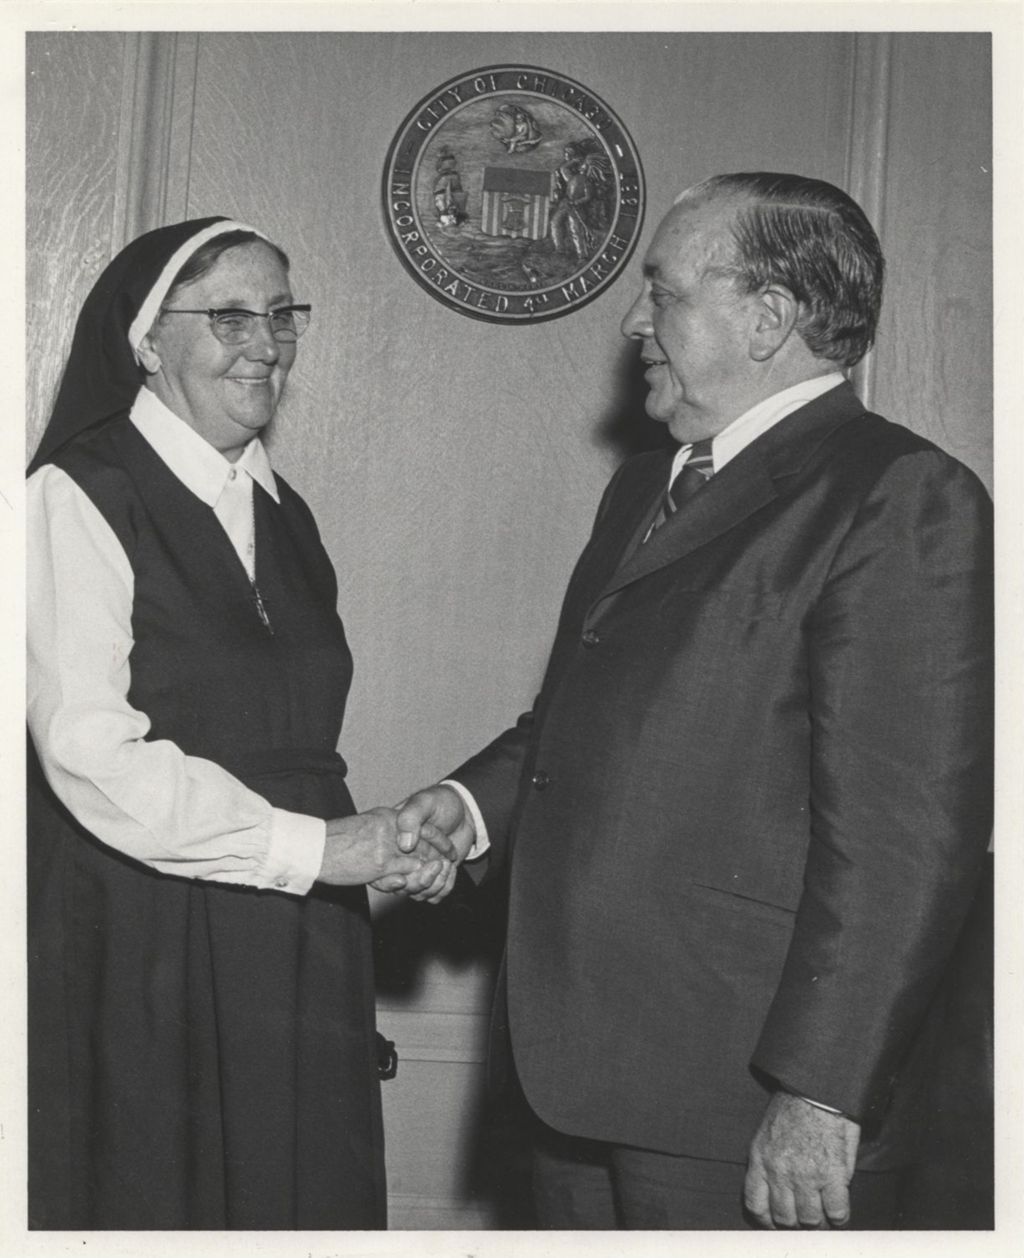 Miniature of Sister Annunciata with Richard J. Daley